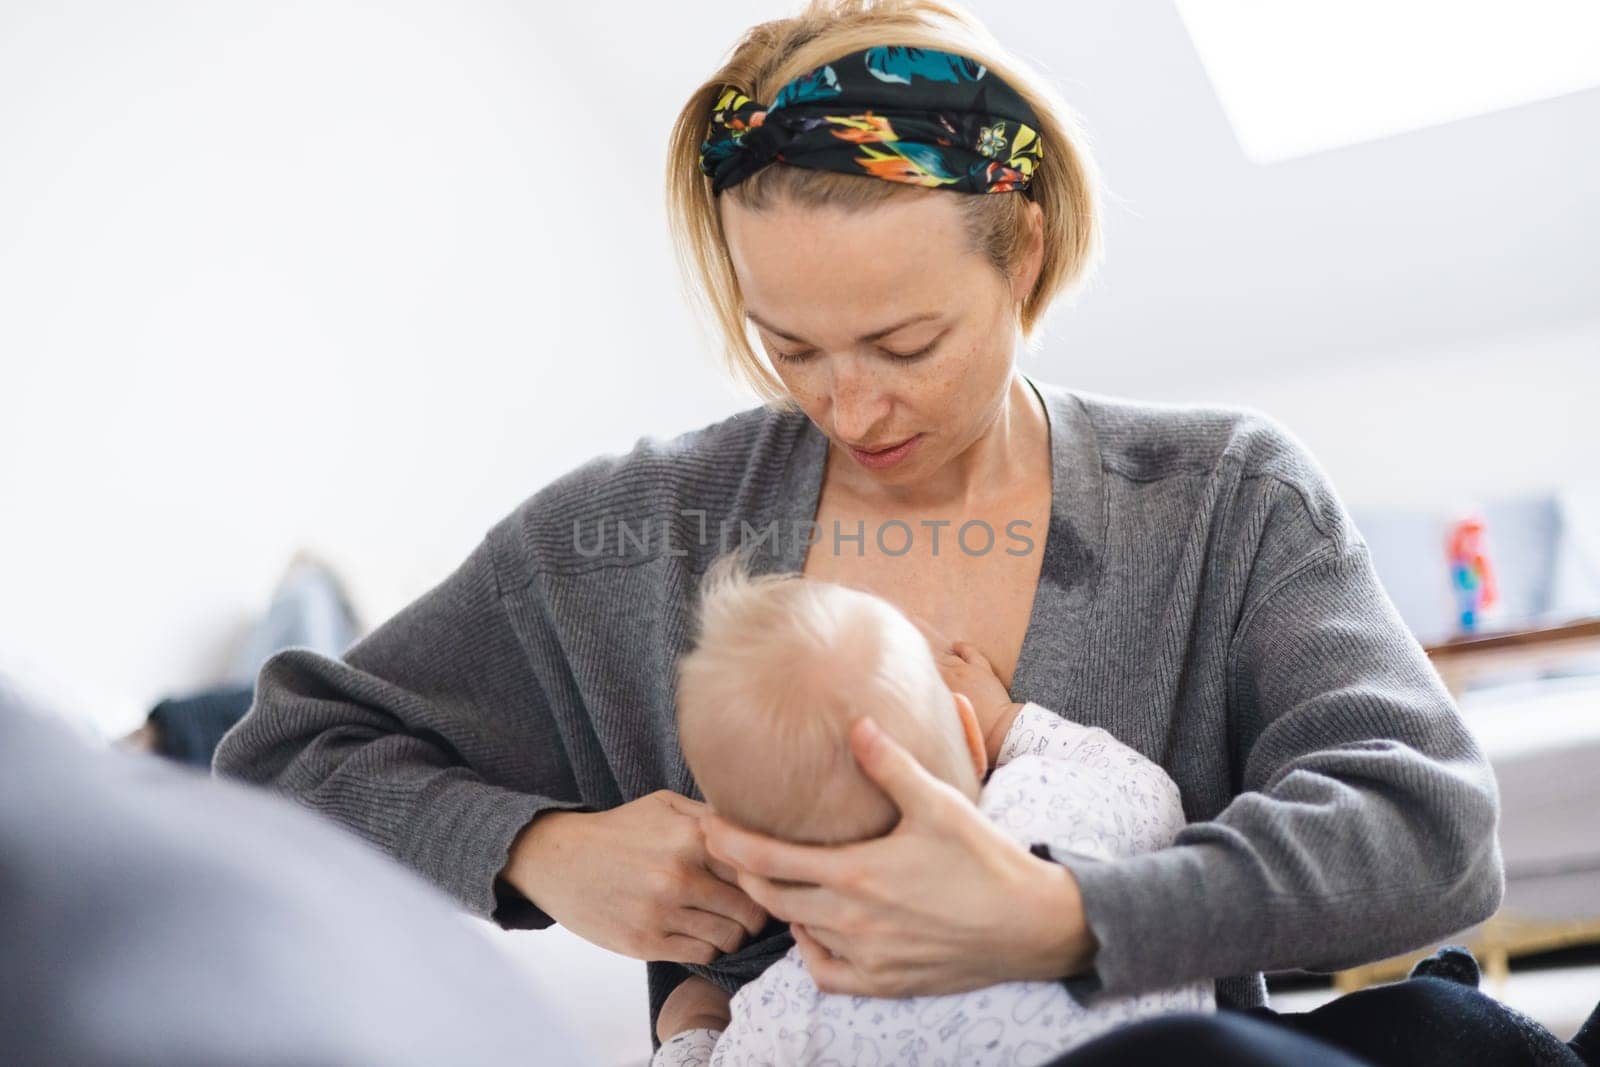 Young woman breastfeeding her infant baby boy casualy sitting on child's playing mat on living room floor at home